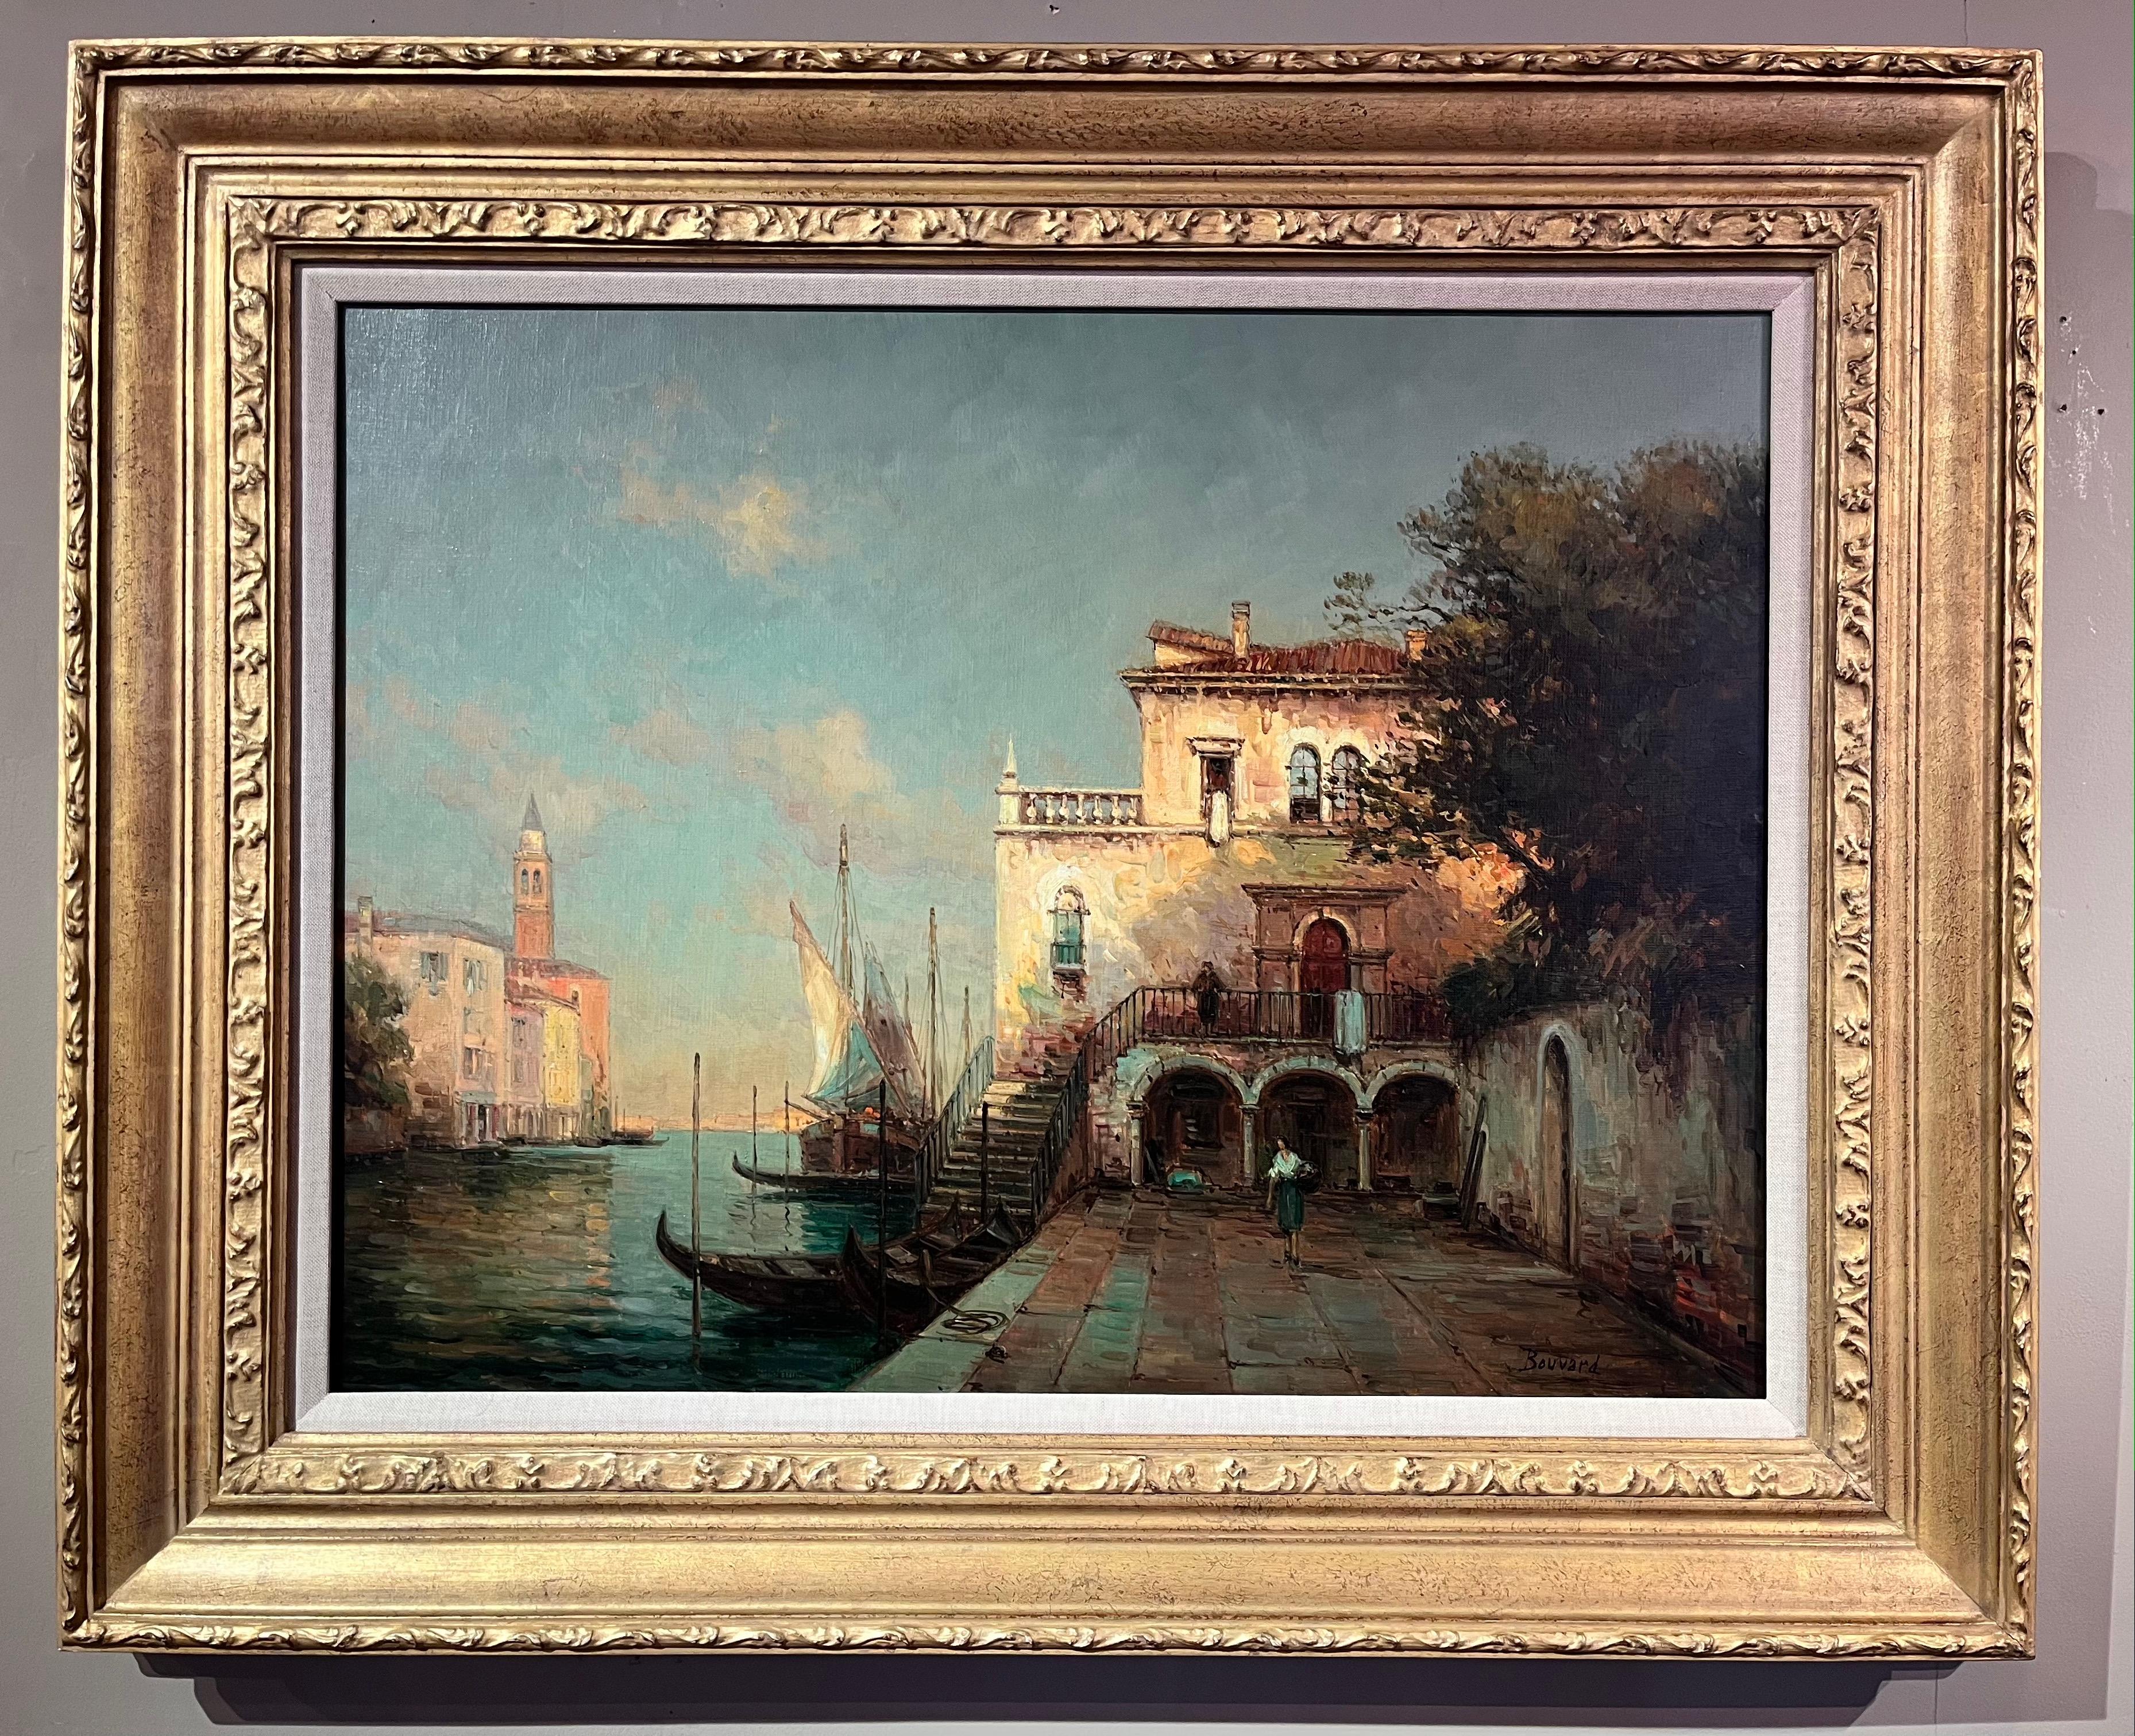 'Sunrise in Venice' Venetian Landscape painting of buildings, figures with boats